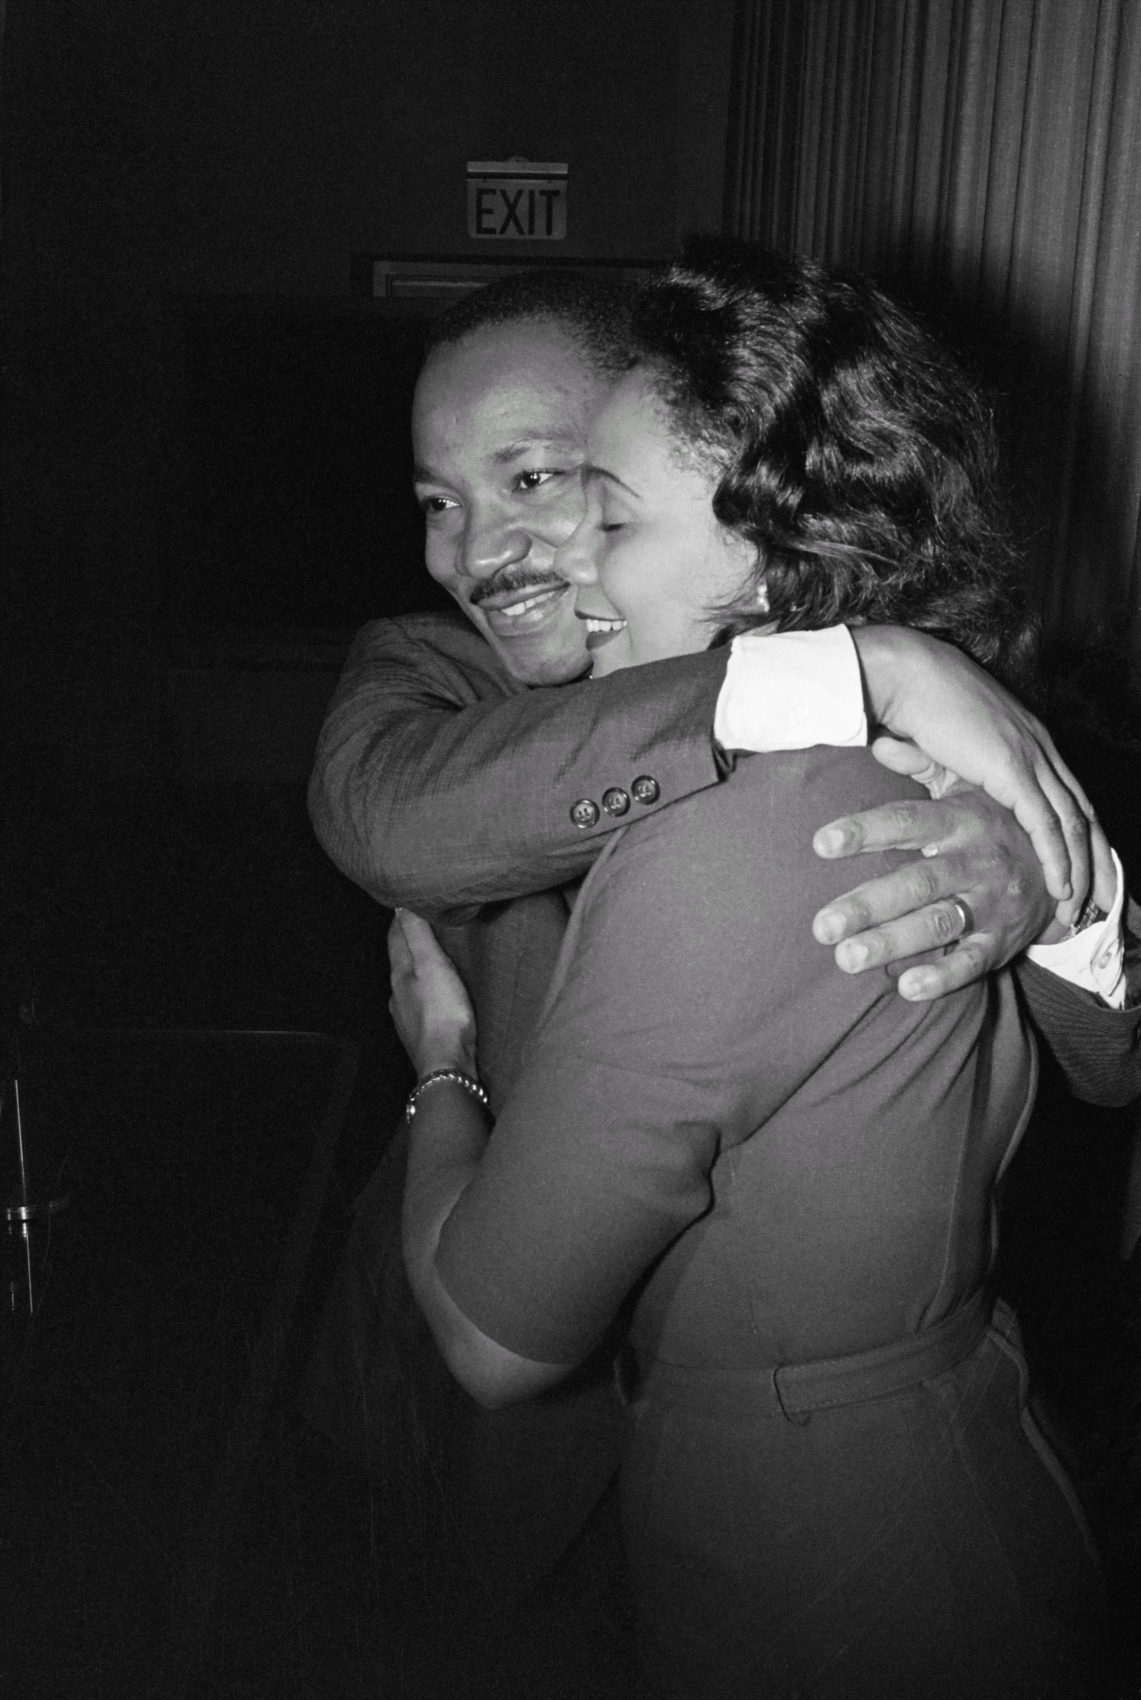 Martin Luther King Jr. and Coretta Scott King during a news conference following the announcement that he had been awarded the Nobel Peace Prize in October 1964. (Courtesy Corbis/Bettman)